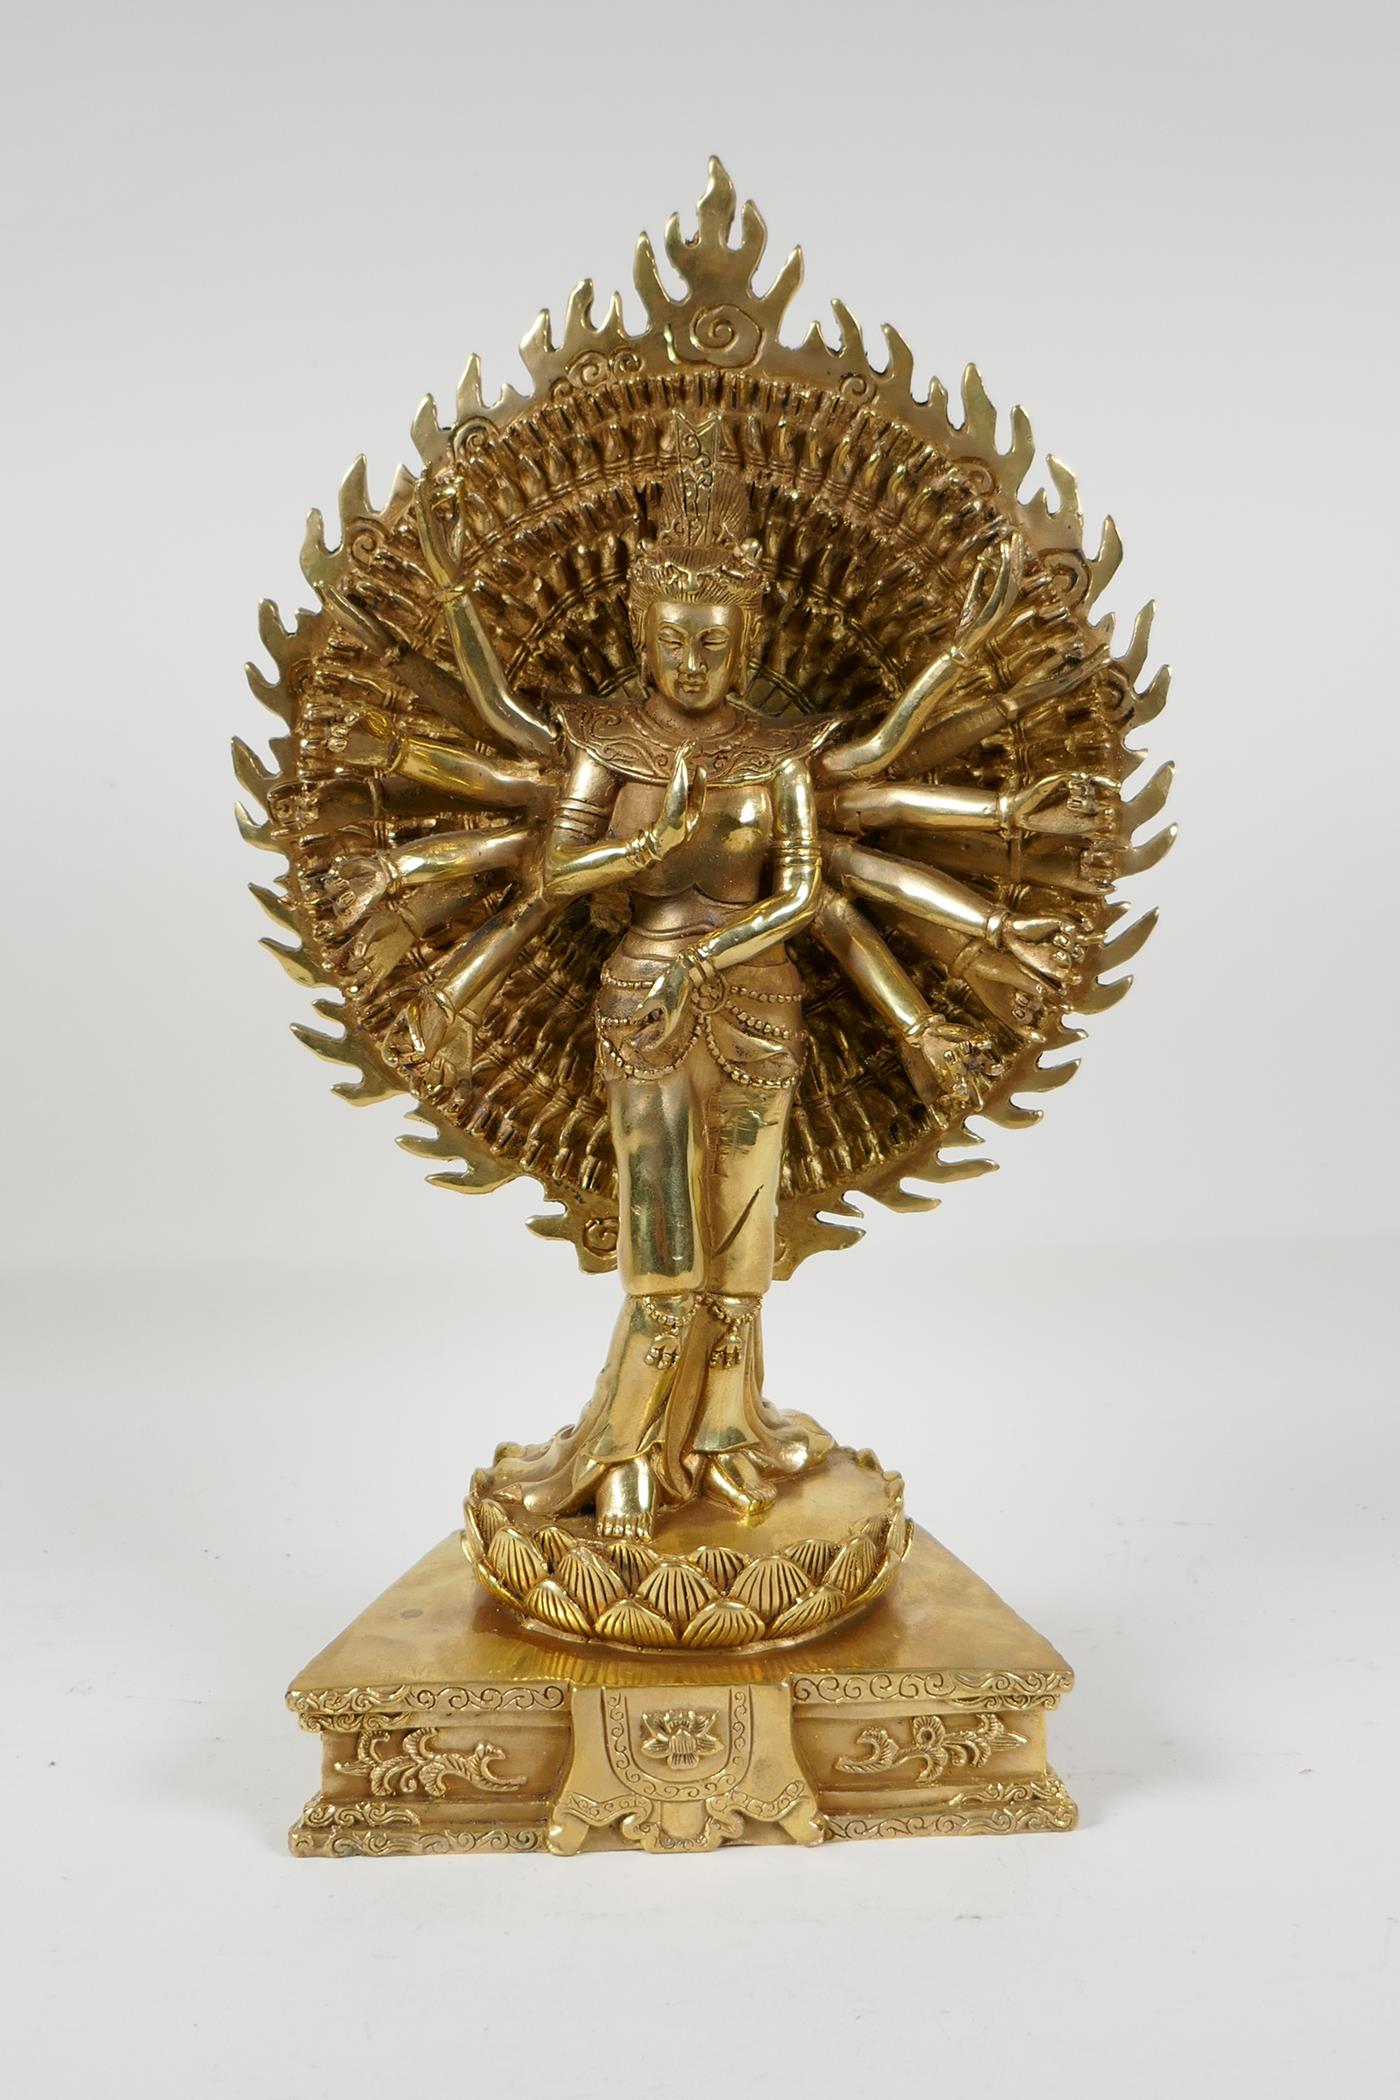 A Sino-Tibetan gilt bronze of a deity with many arms, on a lotus flower, 12½" high